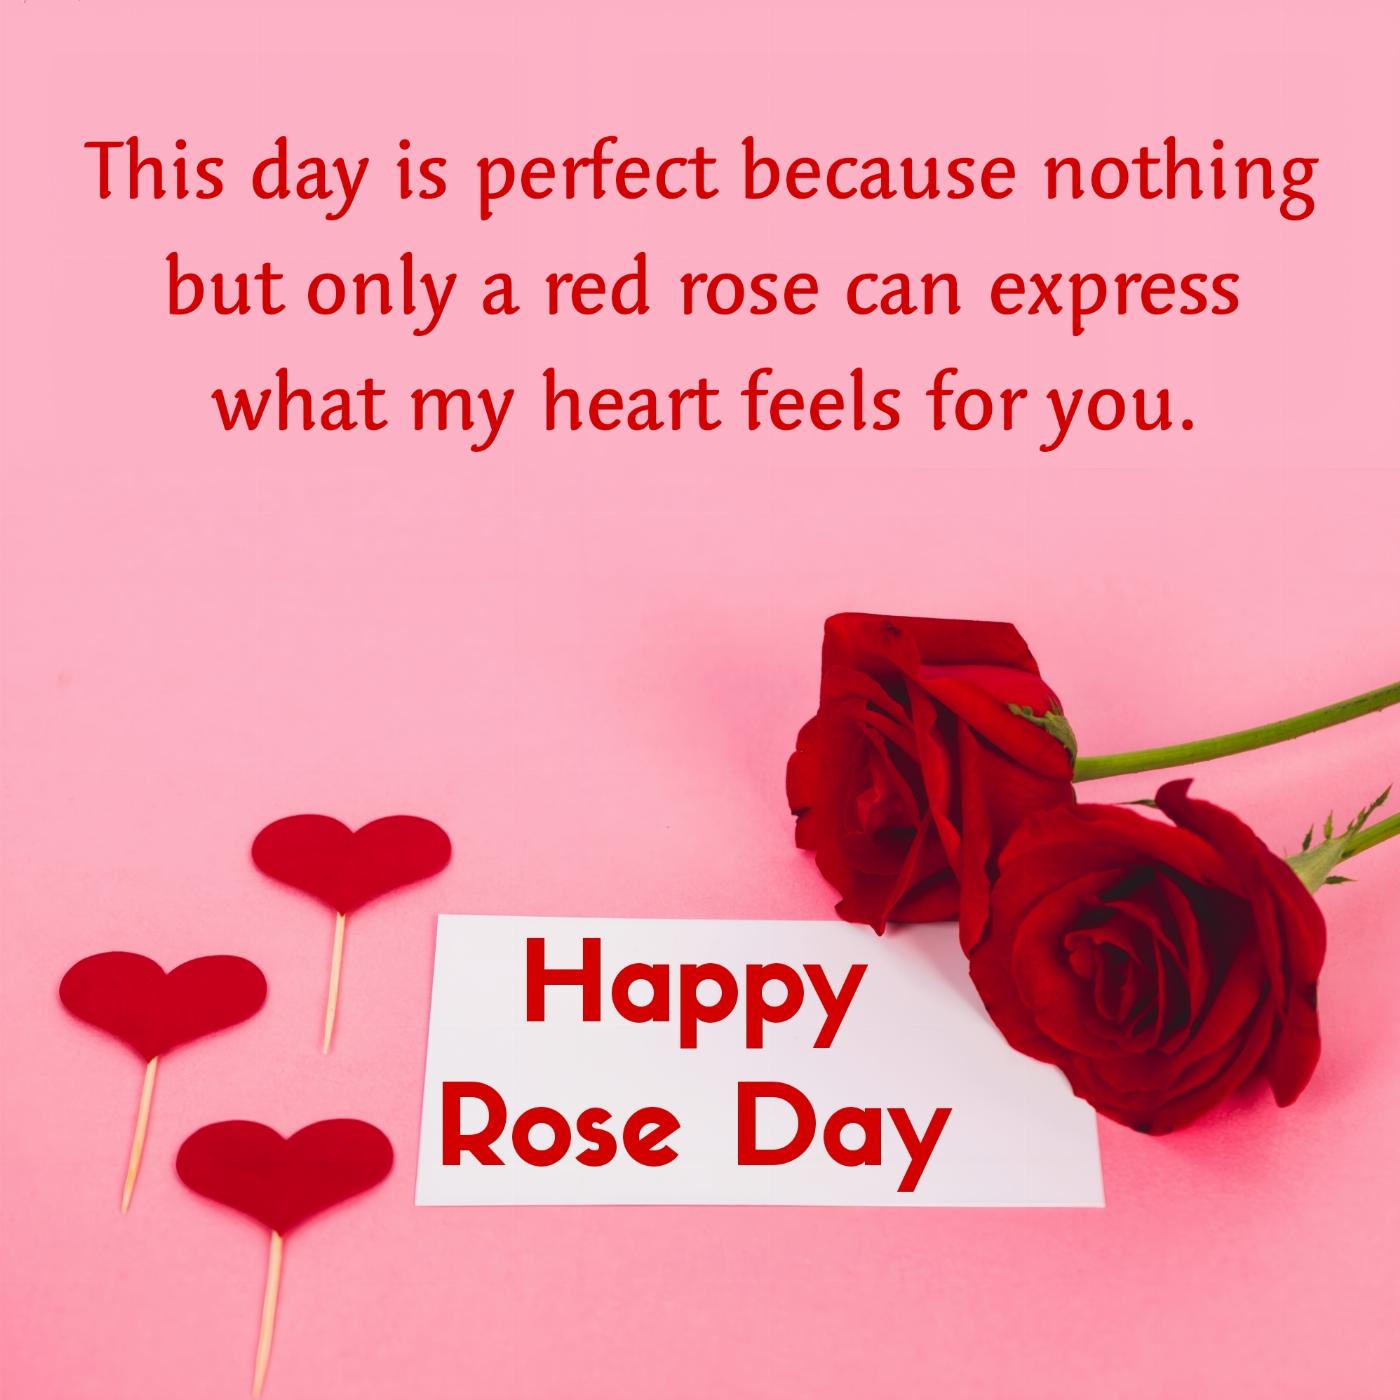 This day is perfect because nothing but only a red rose can express